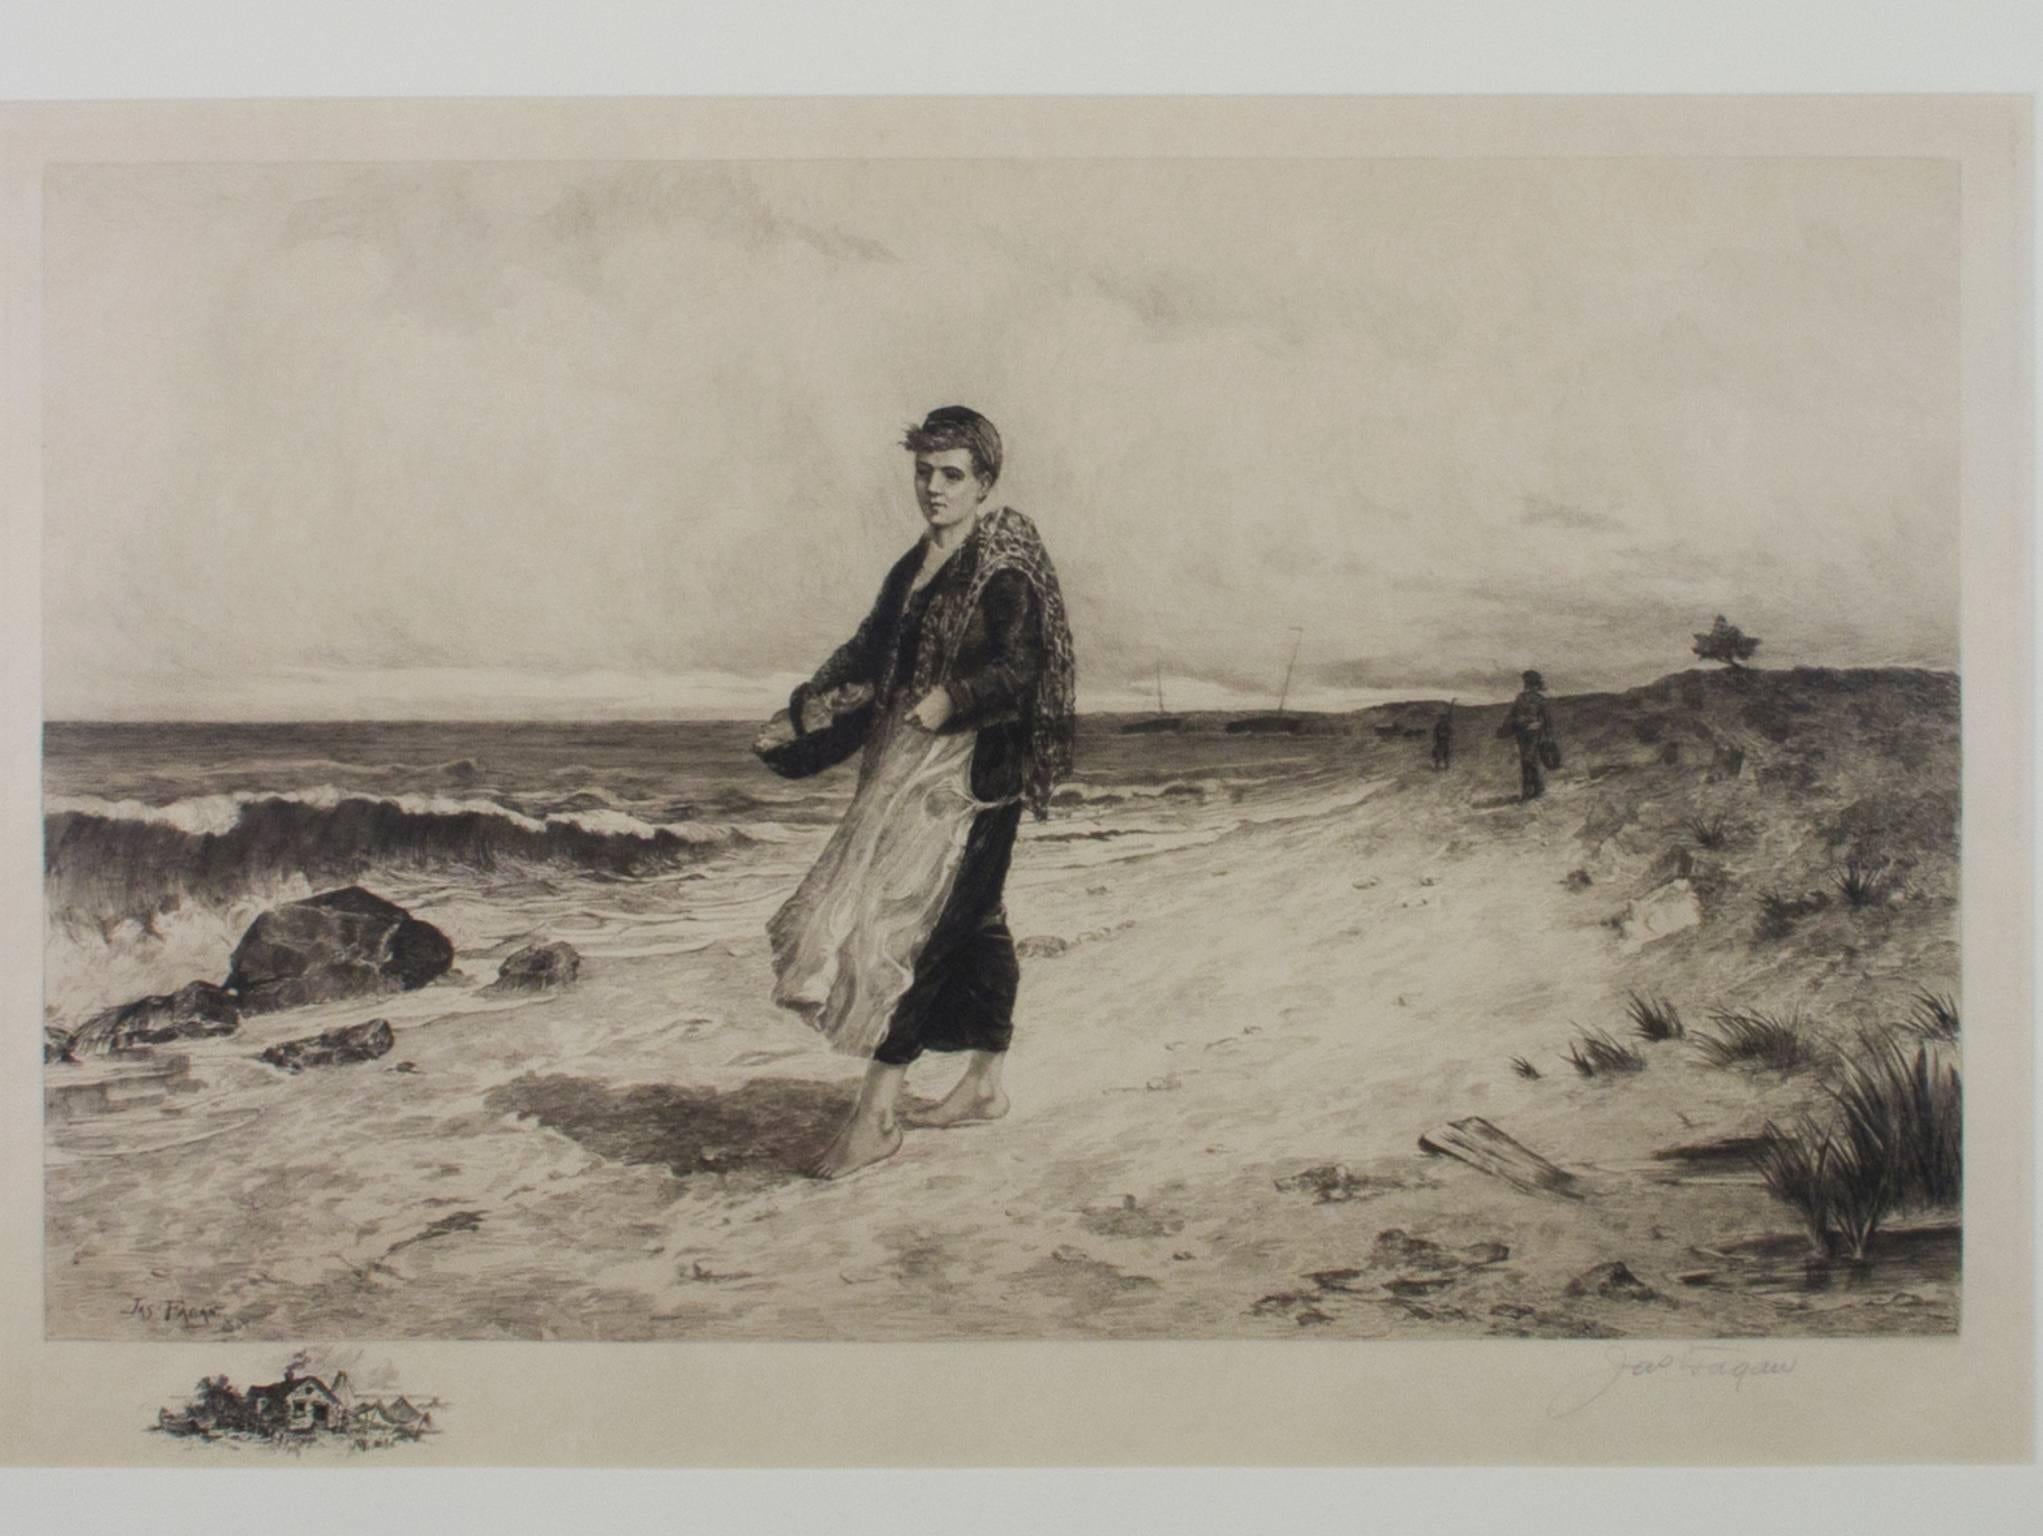 James Fagan Figurative Print - 19th century etching black and white seascape print figure waves rocks signed